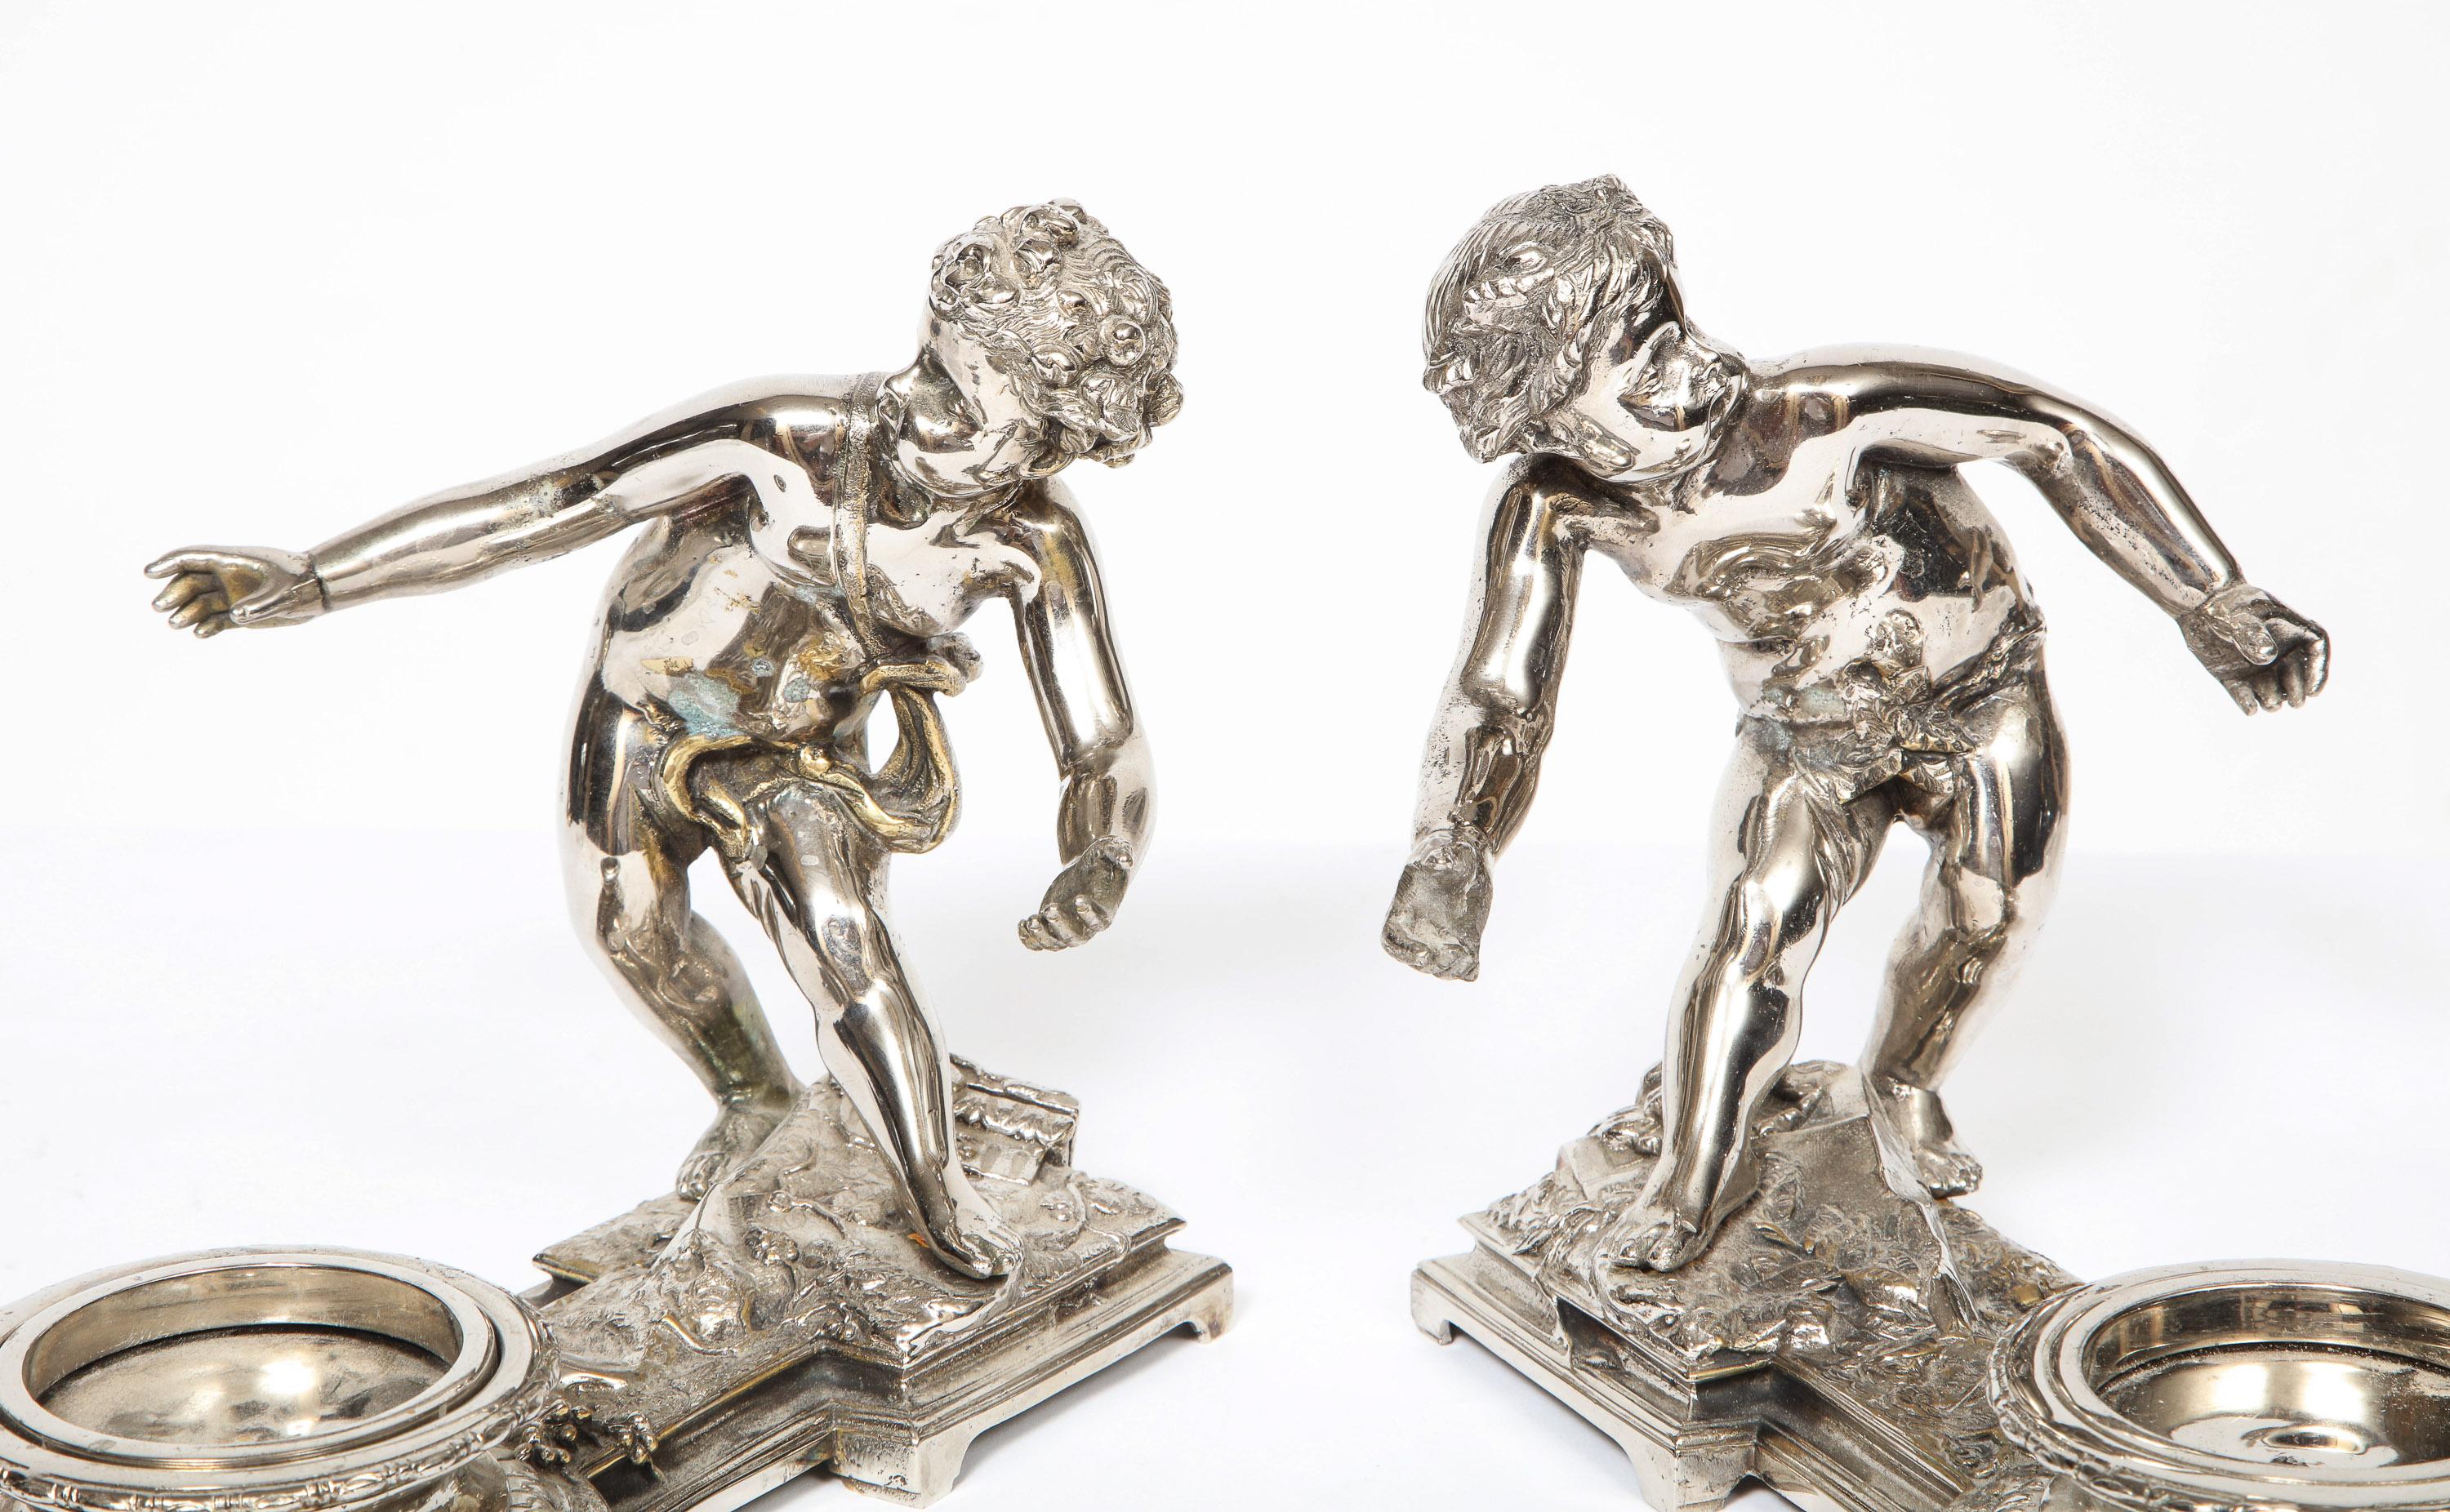 Pair of French Silvered Bronze and Glass Centerpieces with Cherubs 16